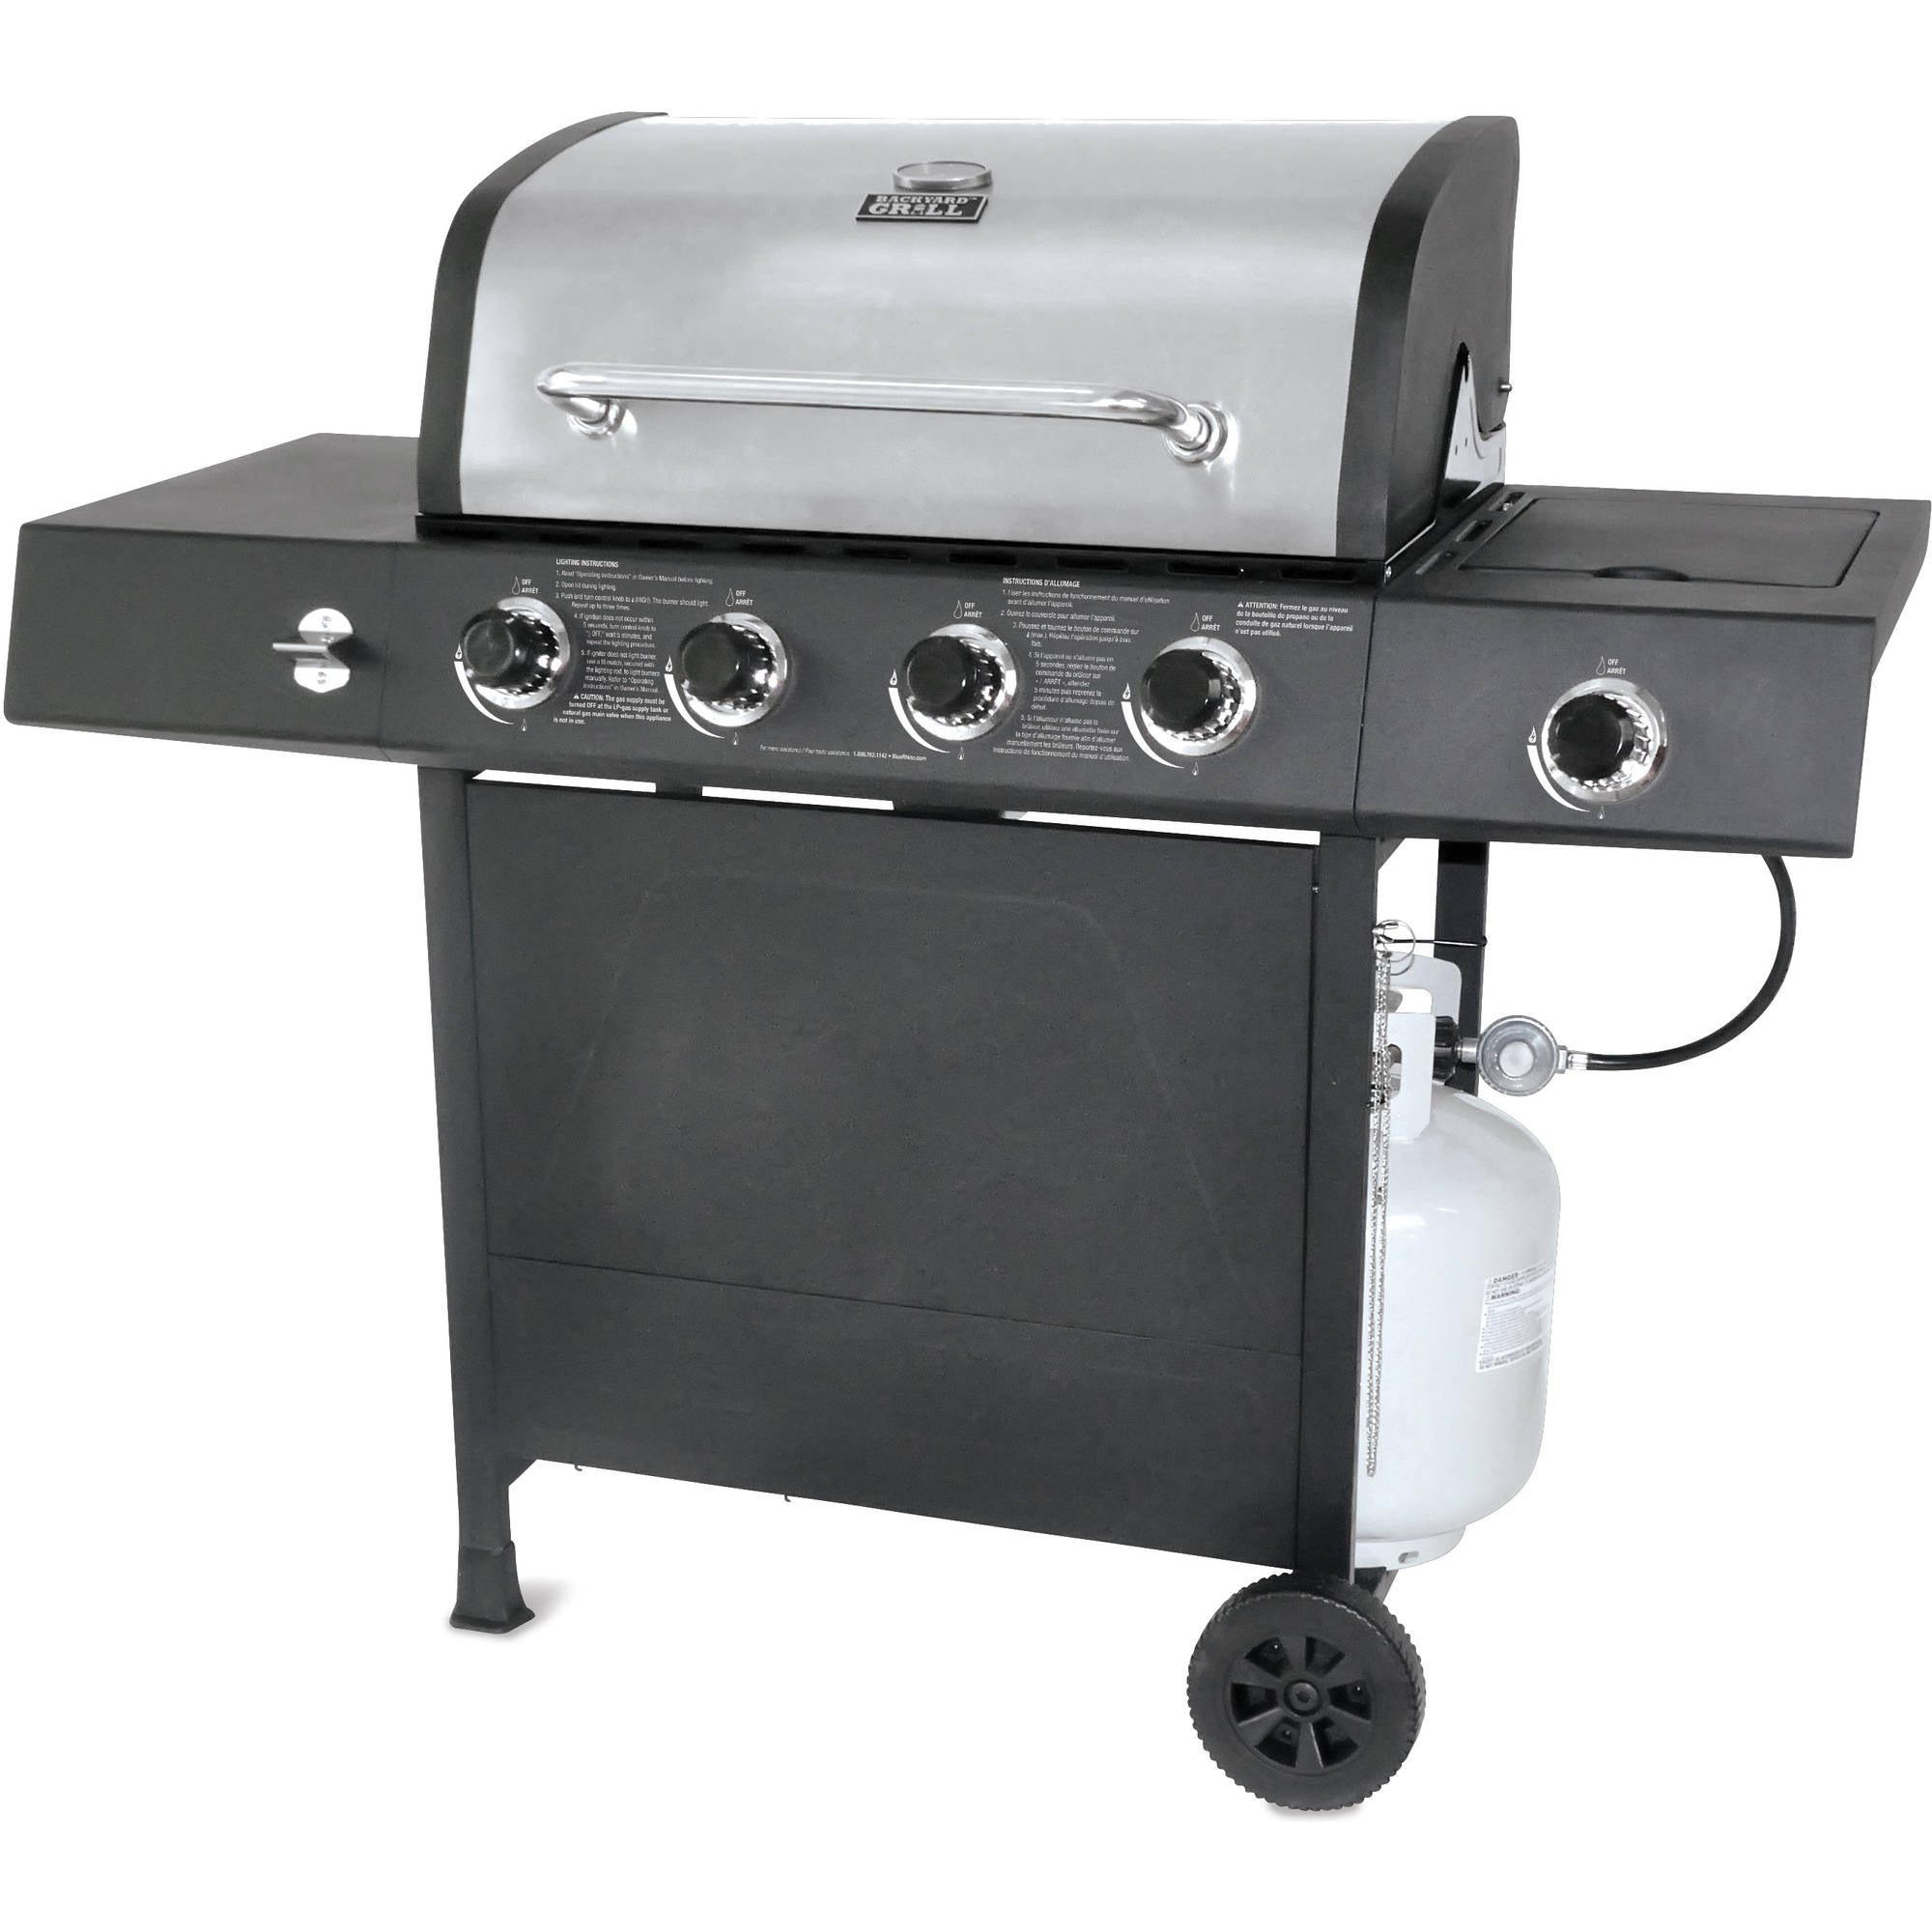 Backyard Grill 4 Burner Gas Grill With Side Burner As Low As 68 98 Upc 728649258483 Dexter Clearance